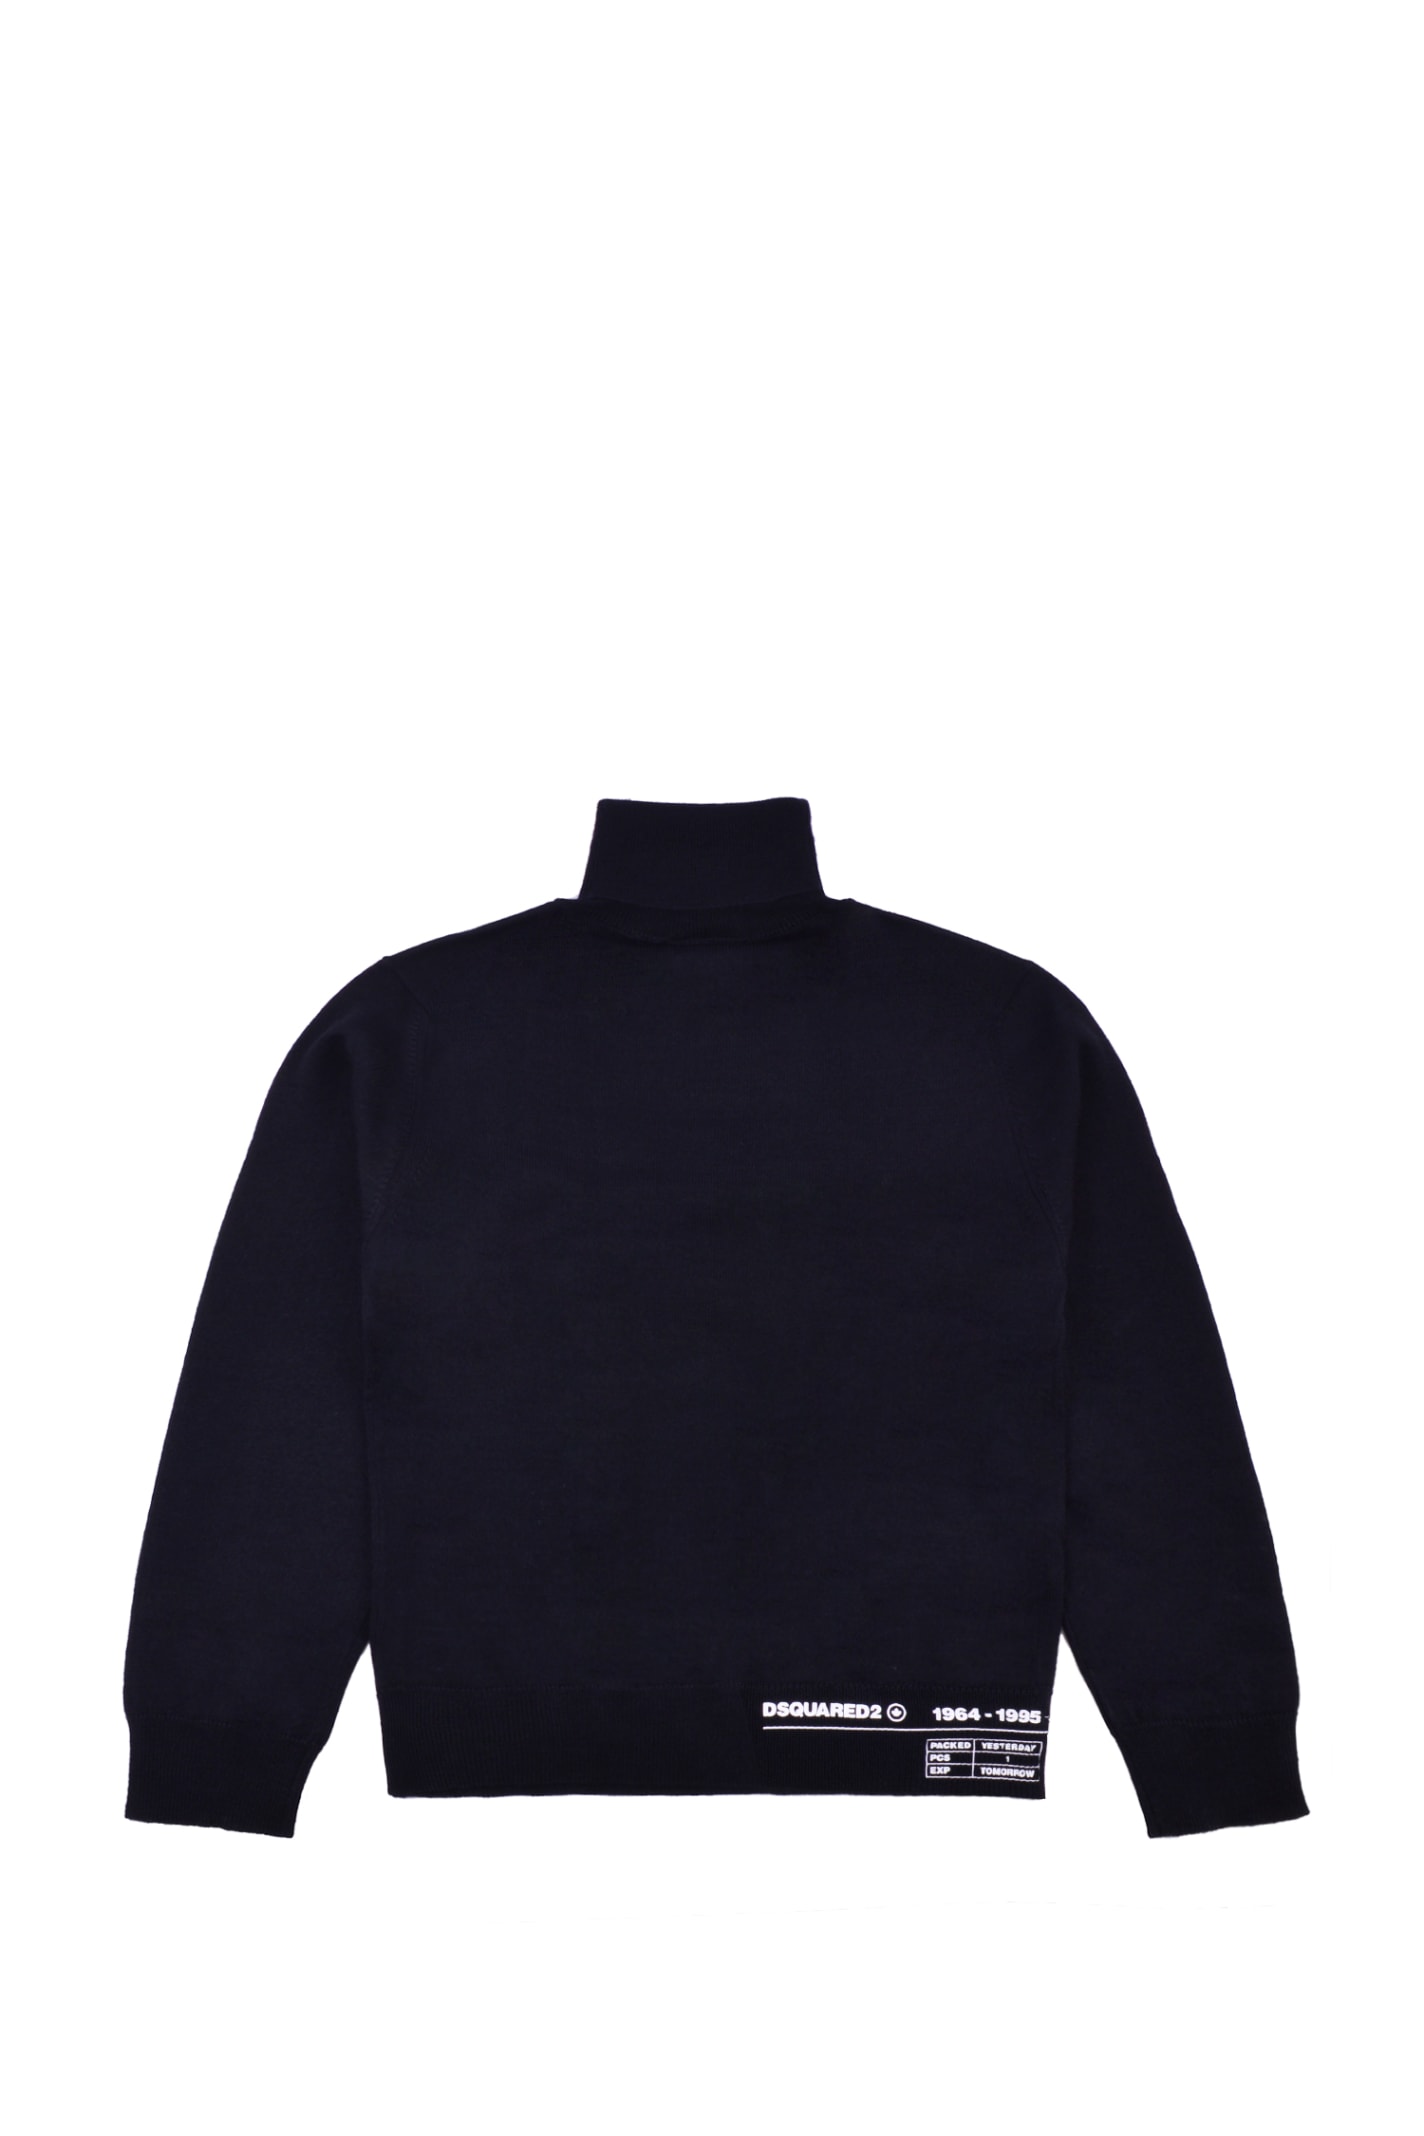 Dsquared2 High Neck Sweater In Wool Blend